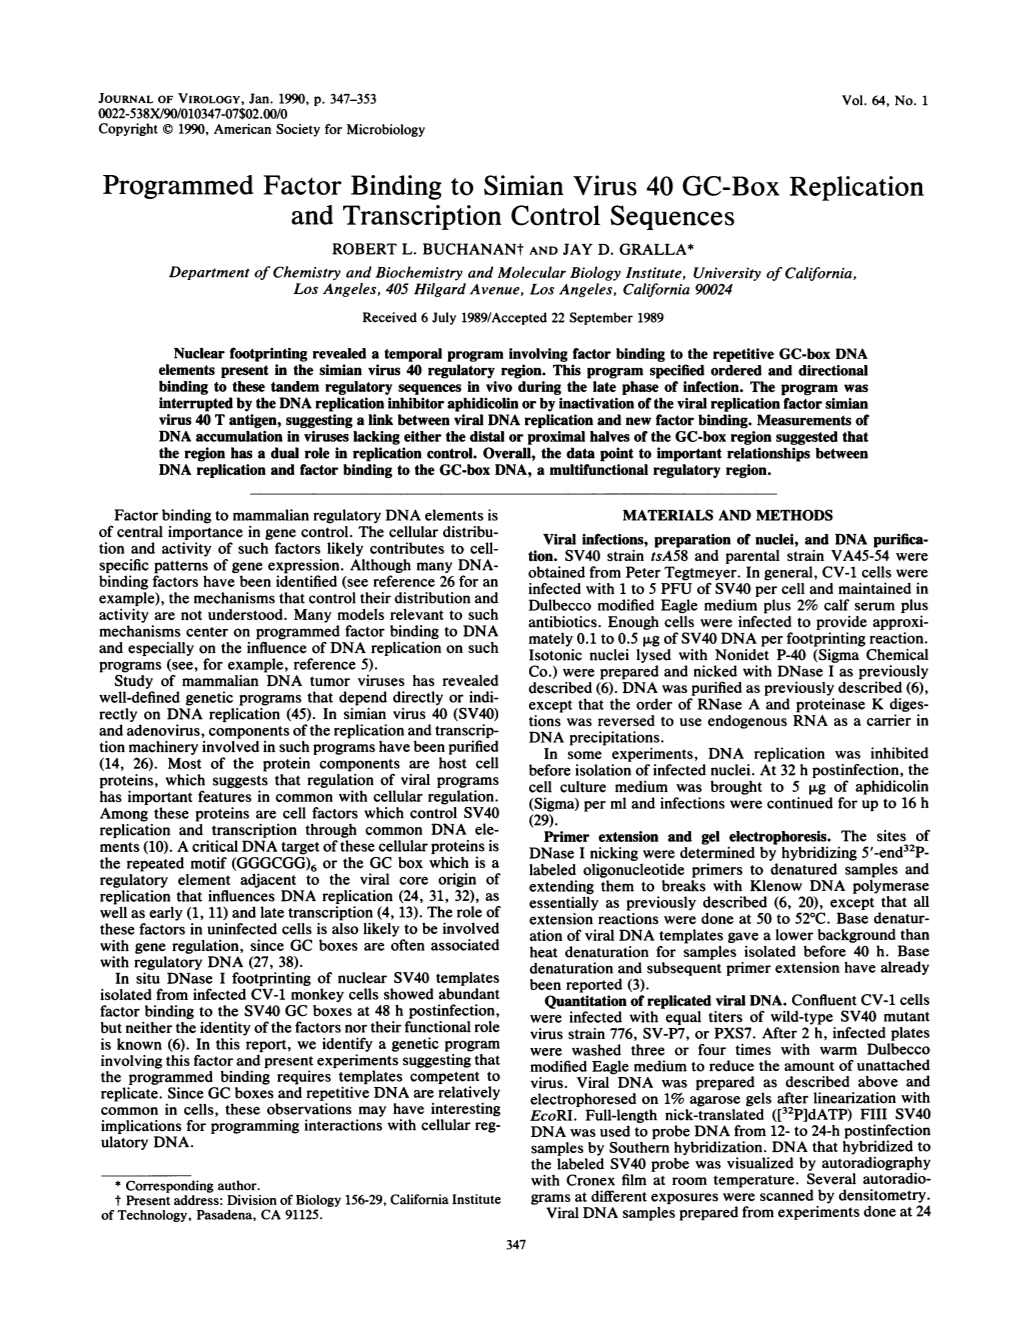 Programmed Factor Binding to Simian Virus 40 GC-Box Replication and Transcription Control Sequences ROBERT L